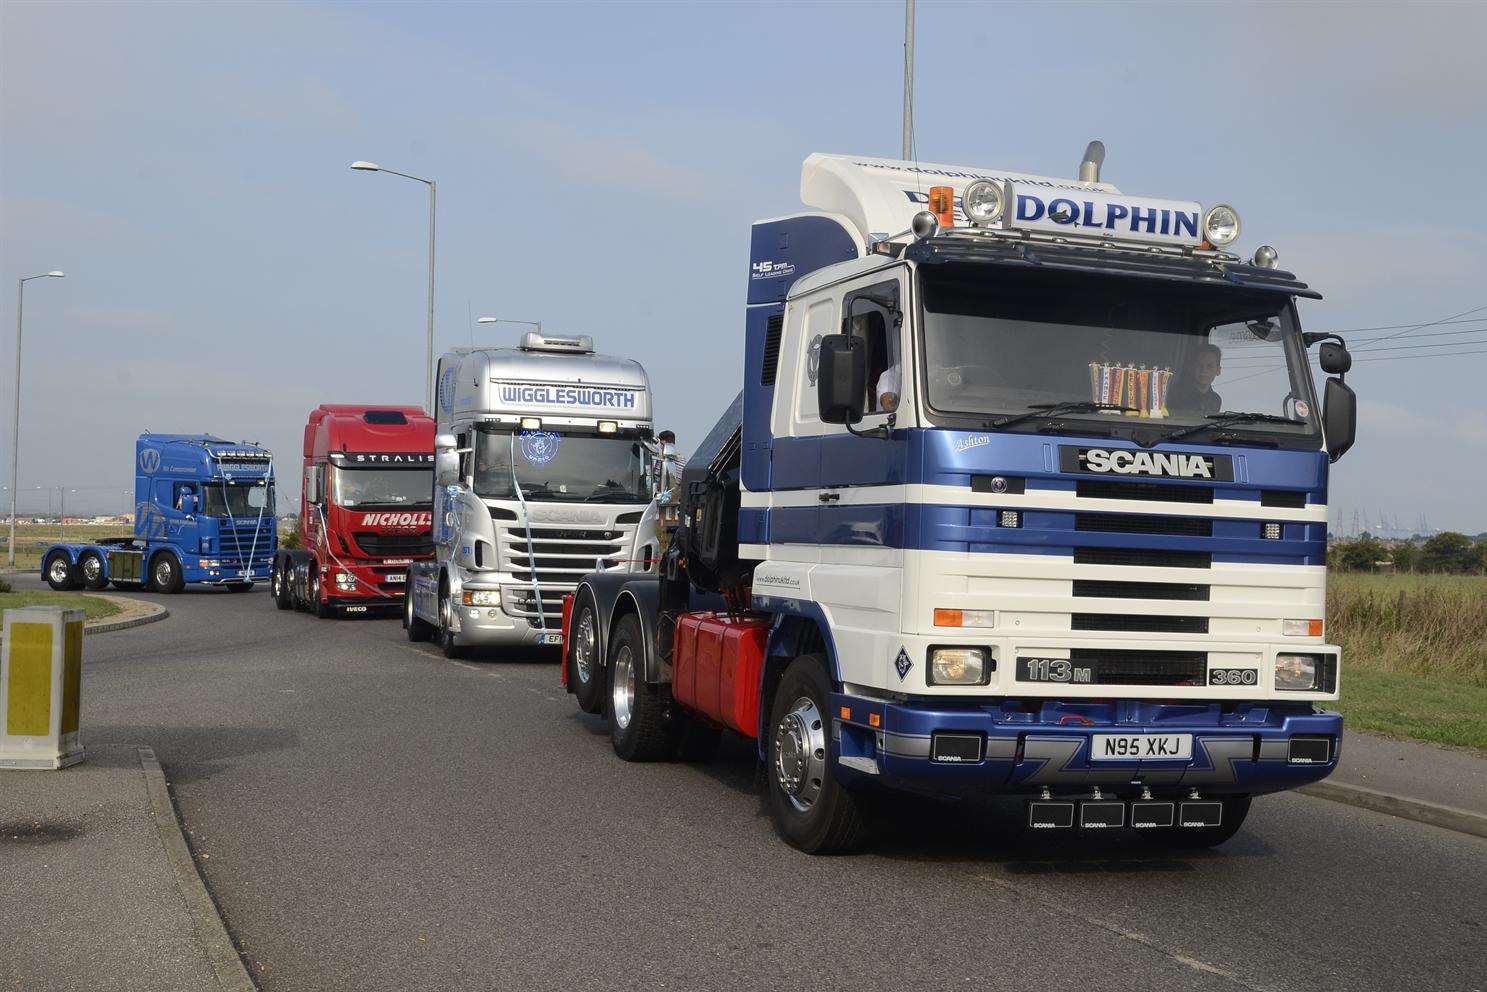 Some of the lorries taking part in the Oliver Smith Truck Rally